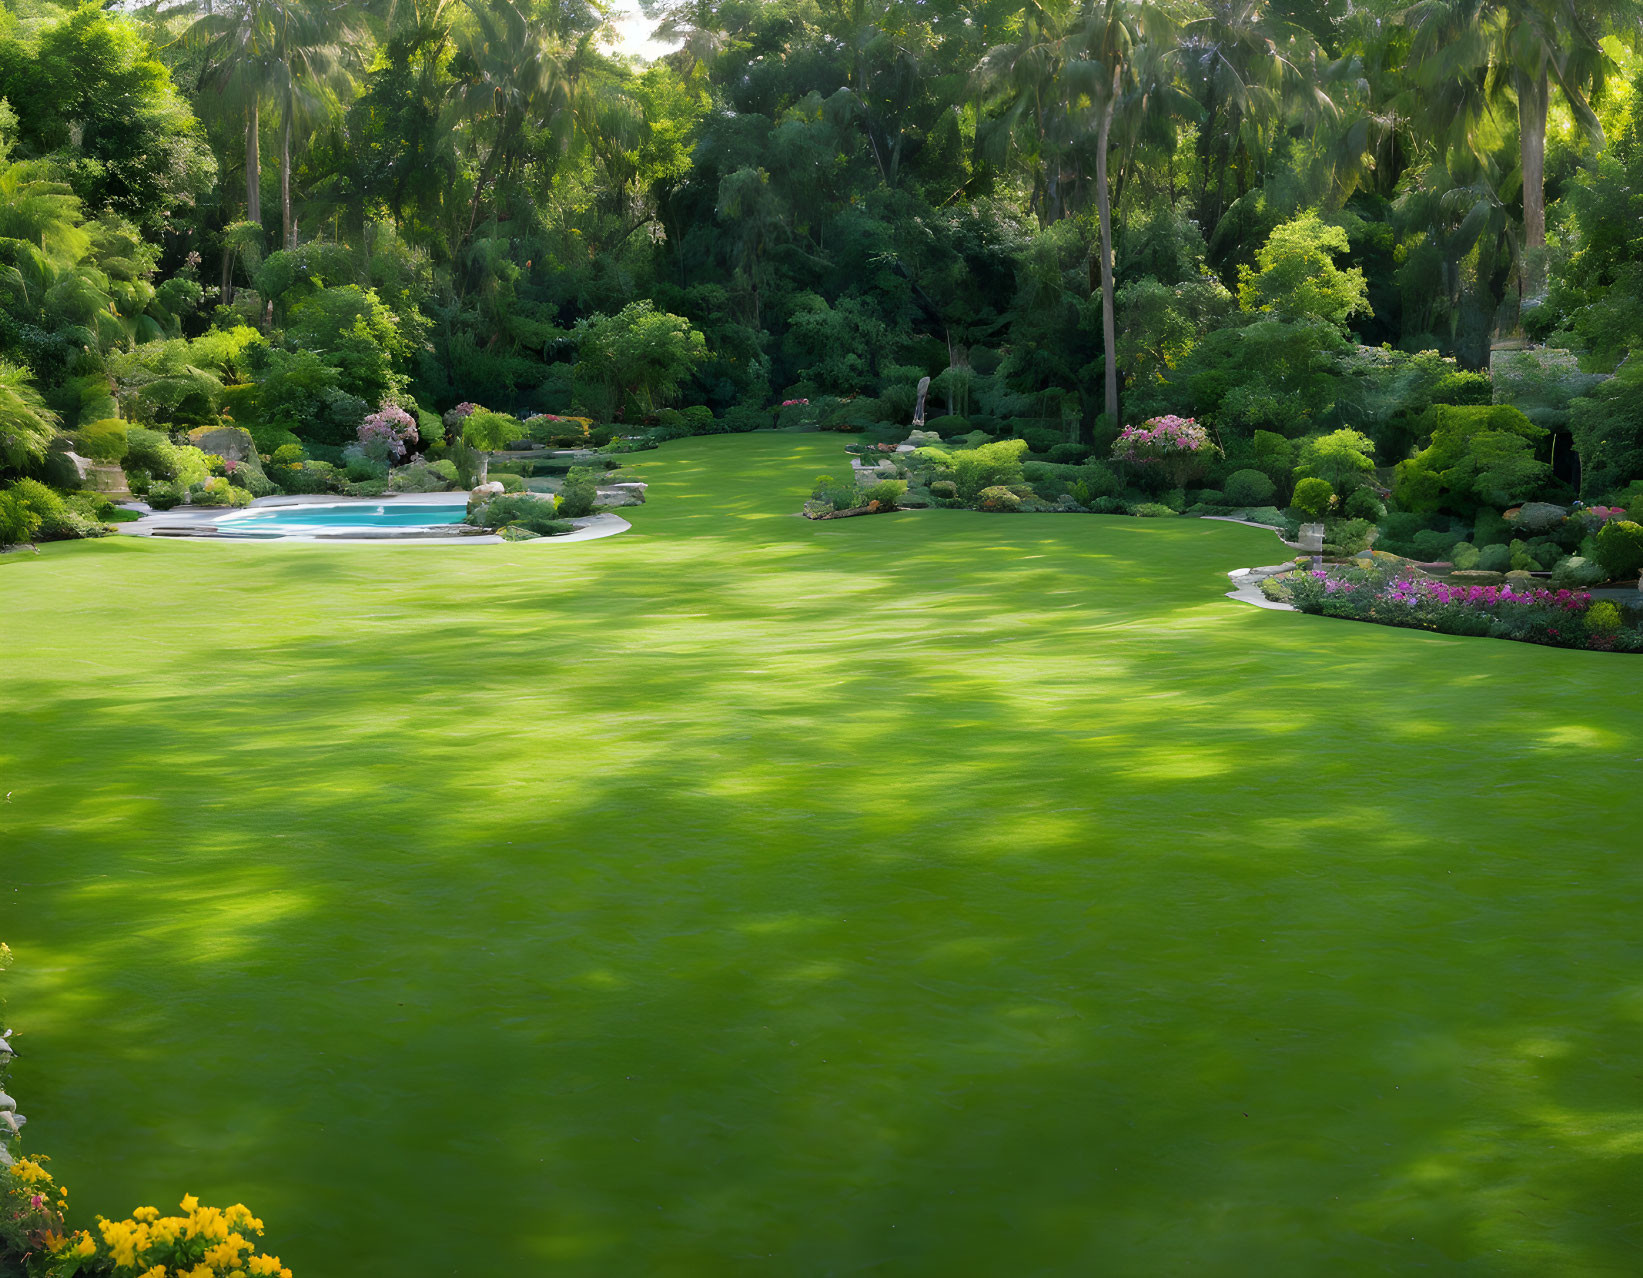 Manicured garden with lush greenery, pond, and trees